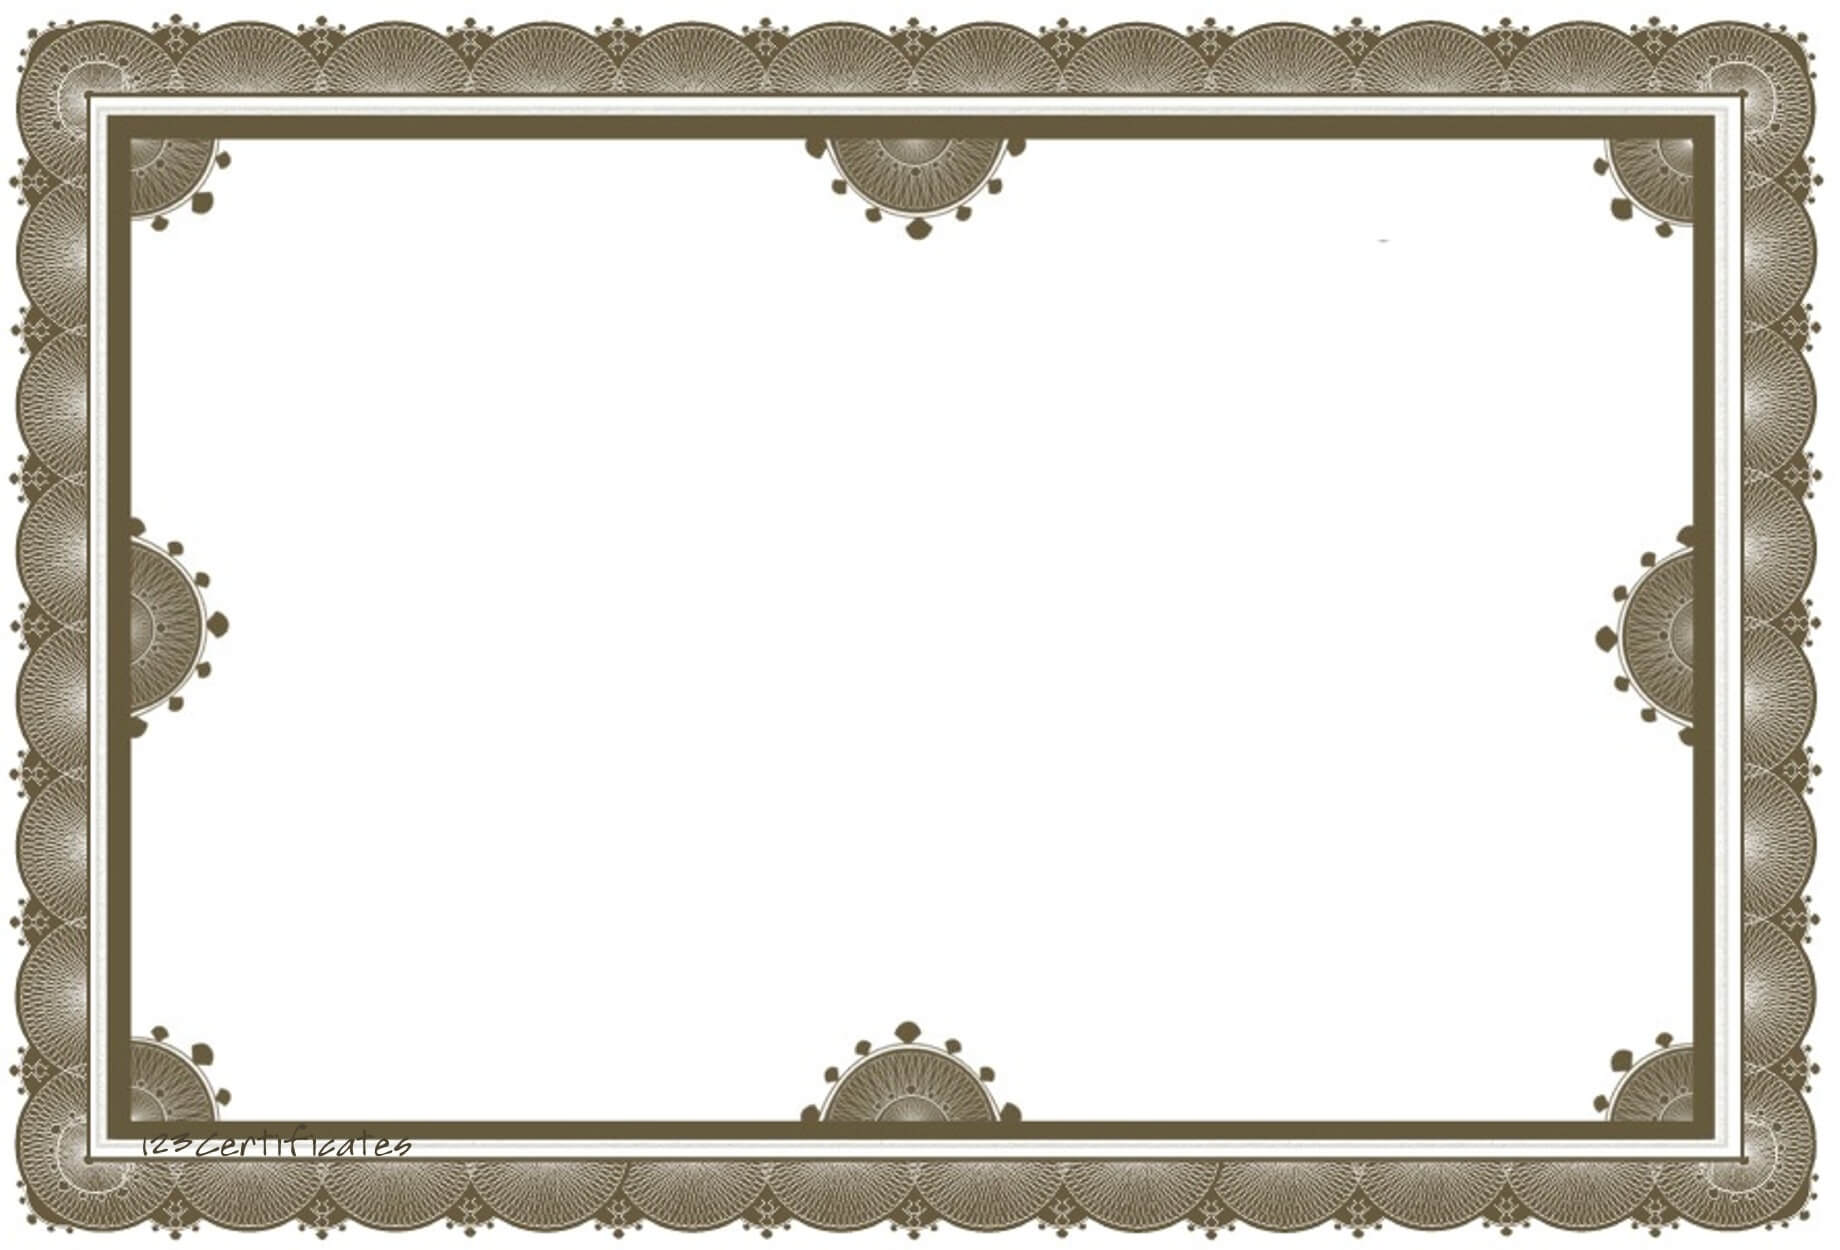 Free Certificate Borders To Download Inside Award Certificate Border Template